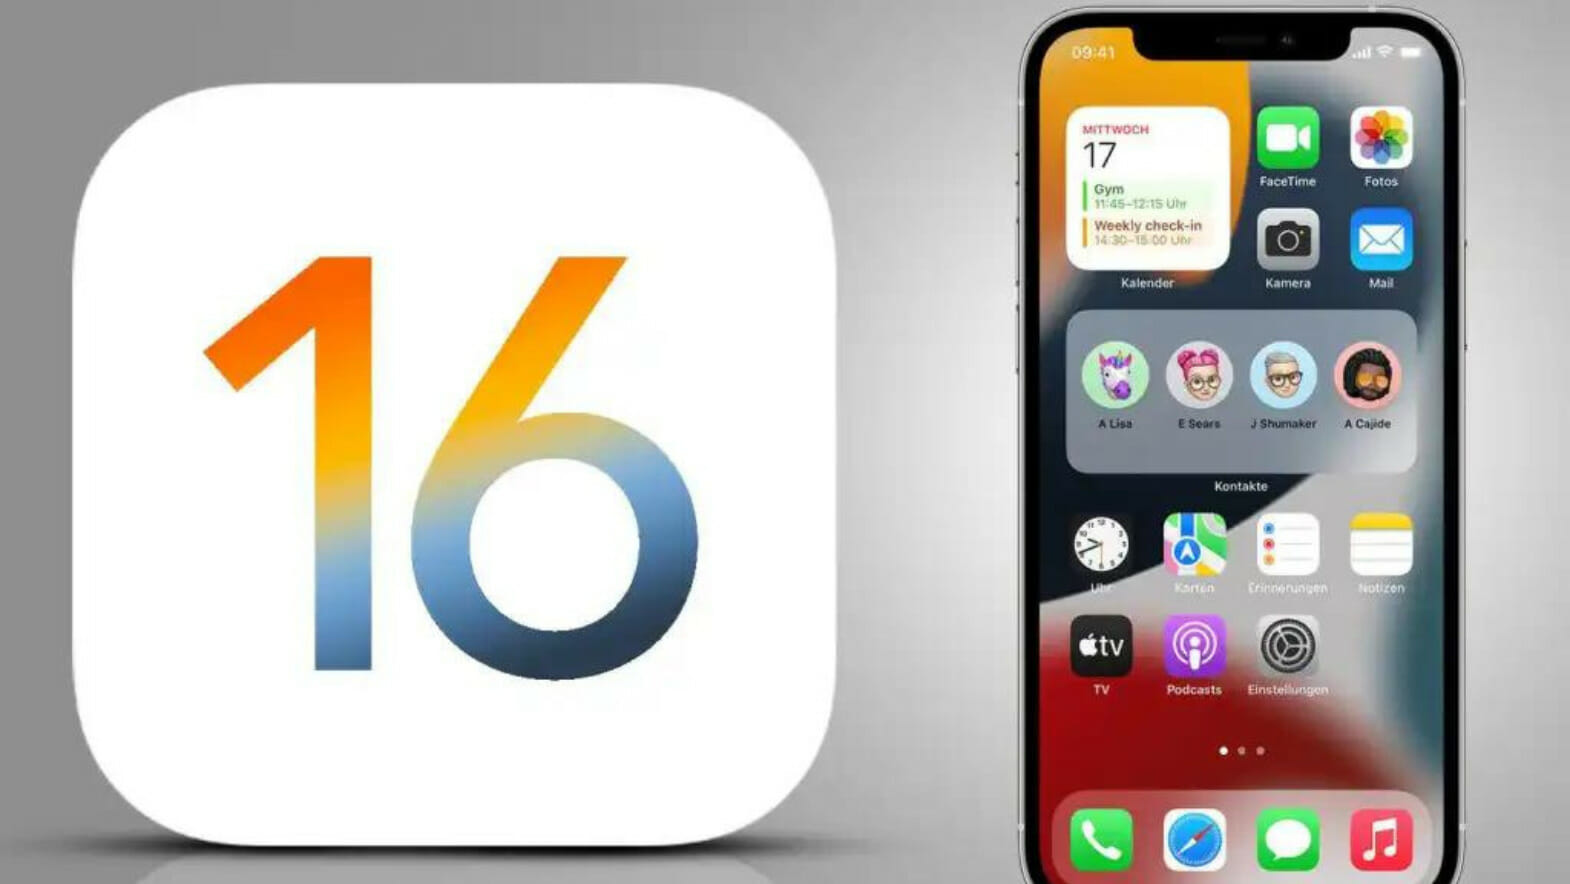 iPhone Hacks: Here's How to Fix the 4 Most Annoying iOS 16 Features - CNET